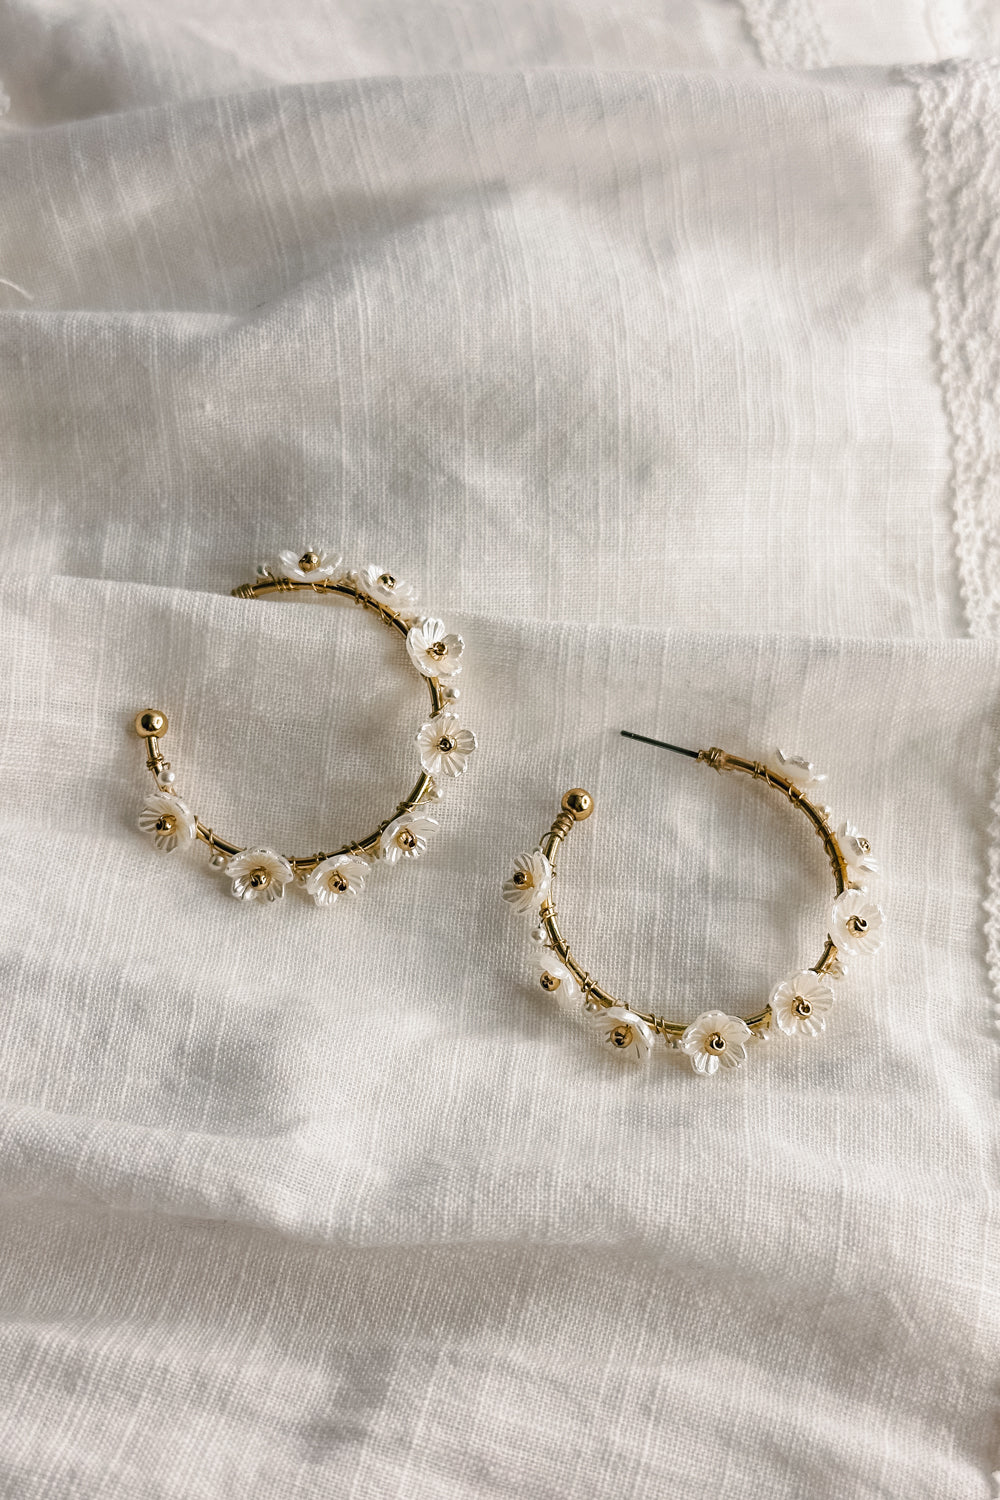 Flat lay view of the Jessie White and Gold Flower Hoop Earring which features medium size open gold hoops, white flower details and back clasp closure